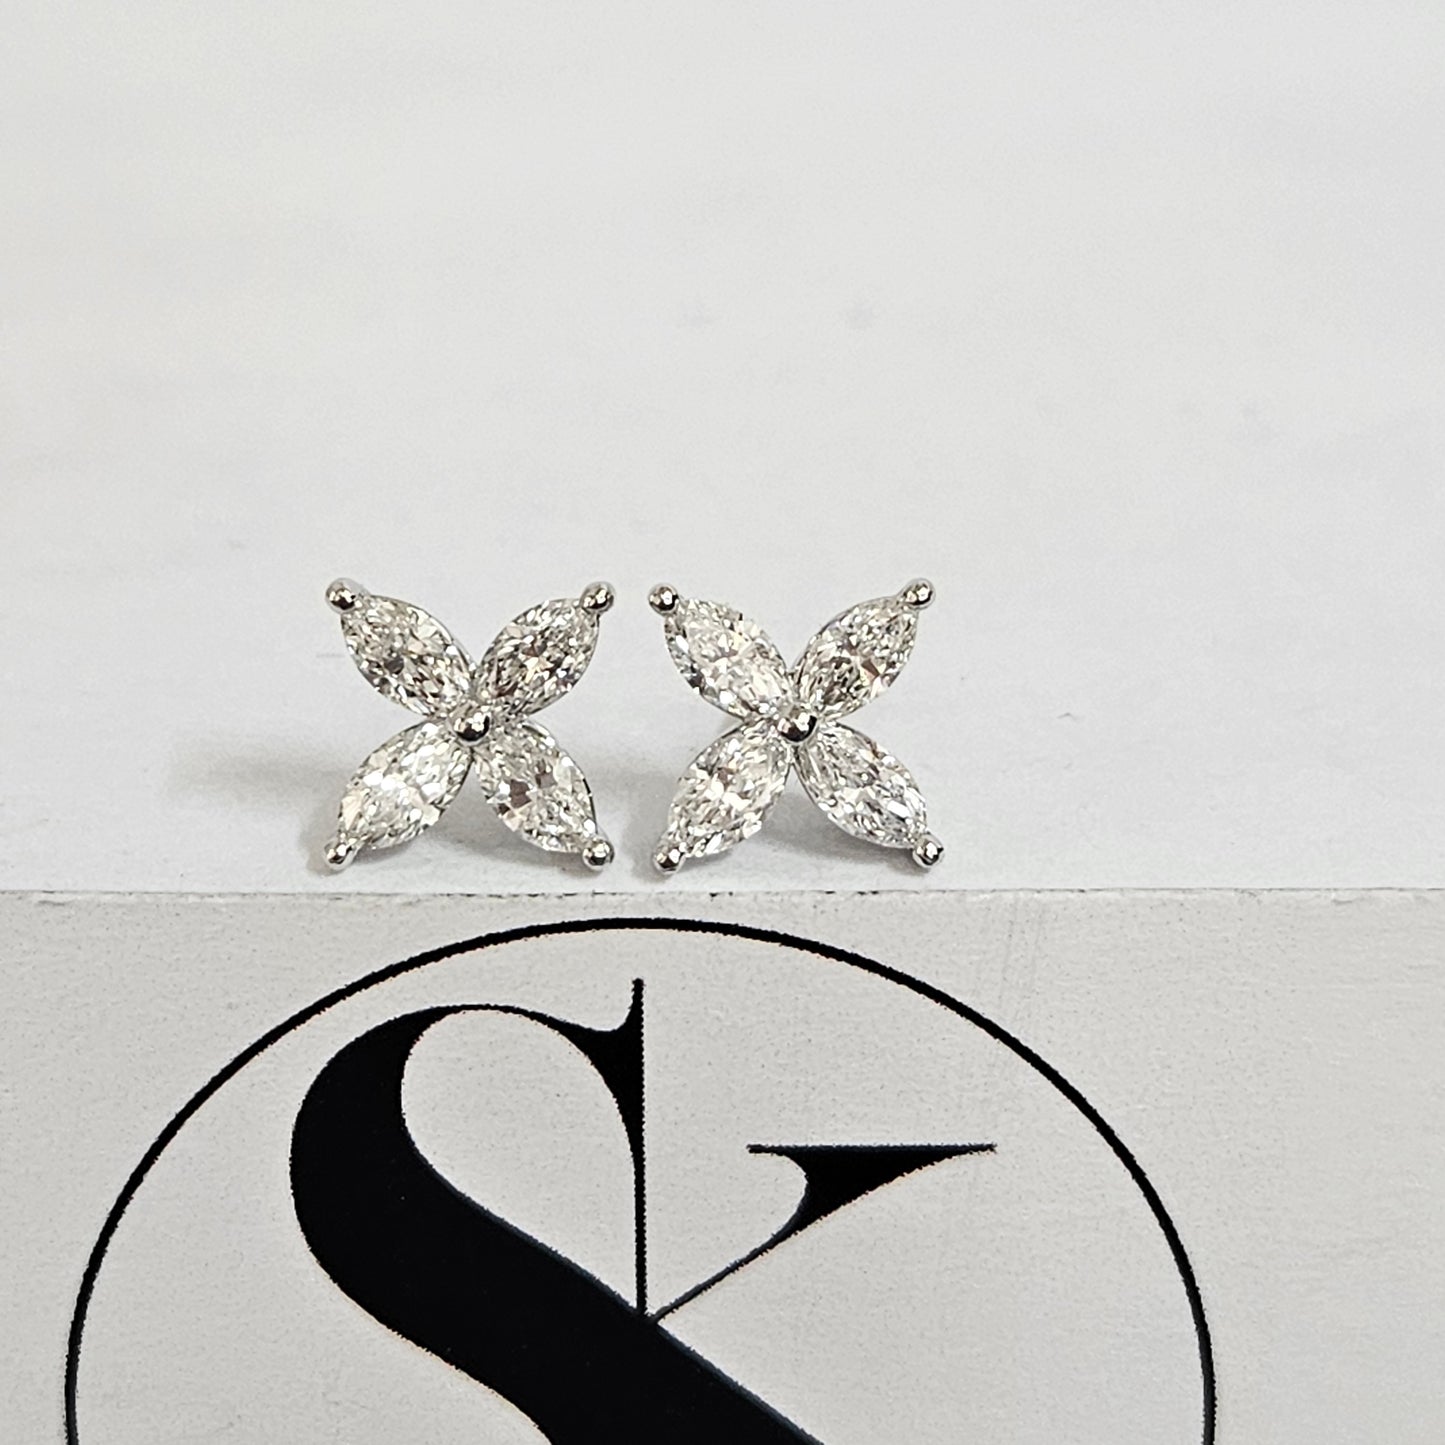 Marquise Diamond Stud Earring/1ct Marquise Diamond Stud Earrings/Tiny Marquise Earring/Anniversary gift/Natural Diamond Stud /Gift for her